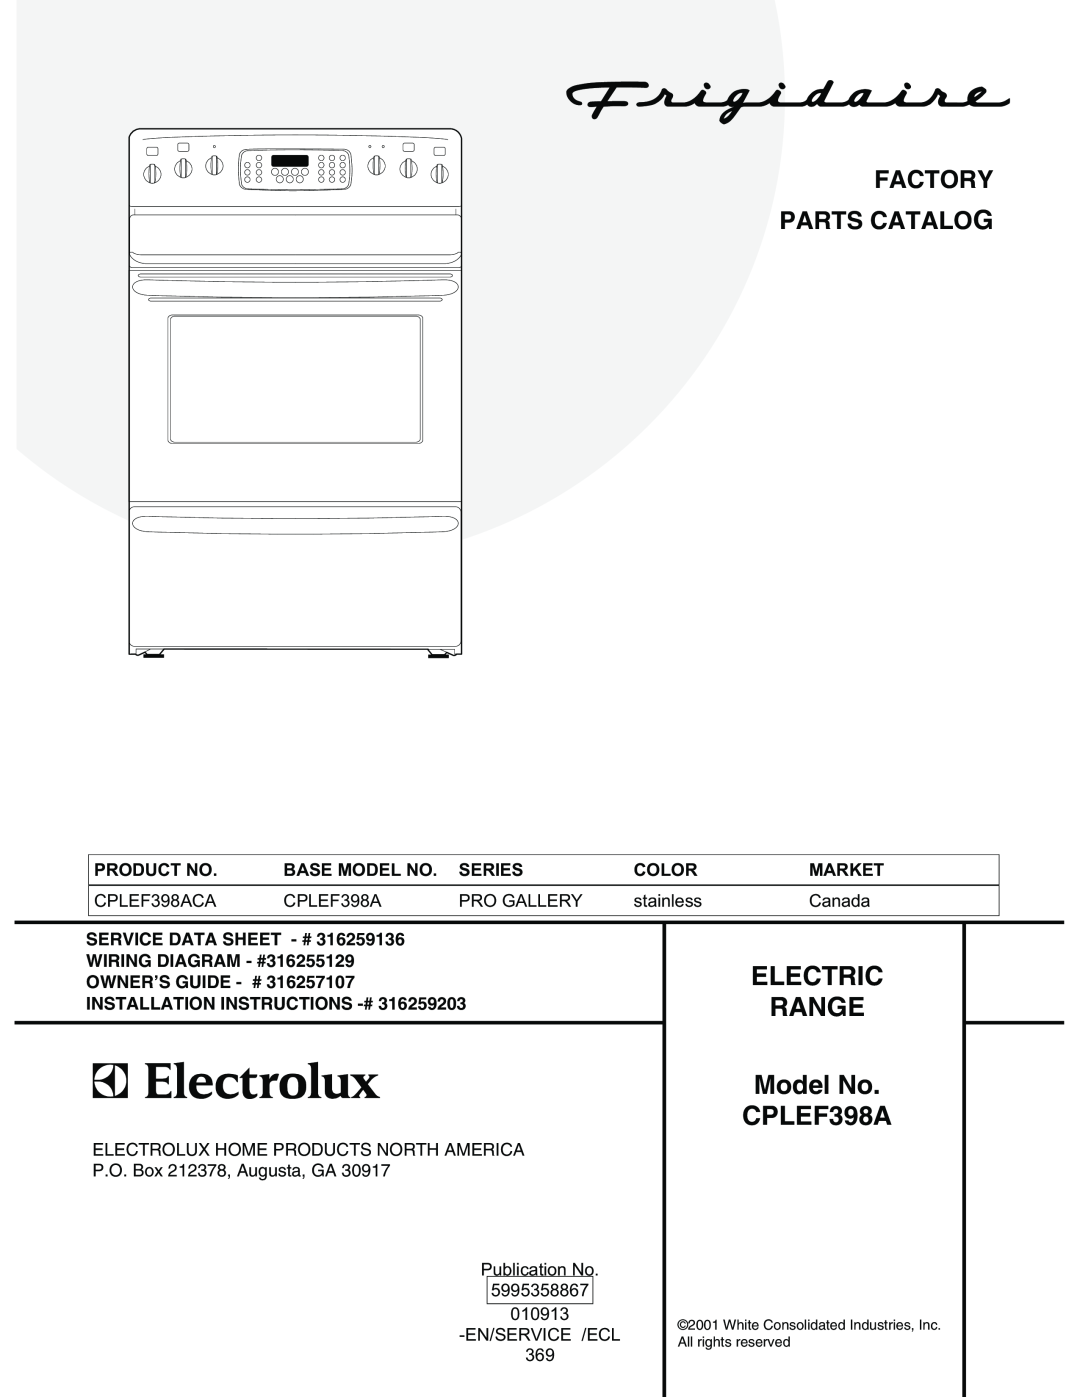 Electrolux installation instructions ELECTRIC RANGE Model No CPLEF398A, Factory Parts Catalog 